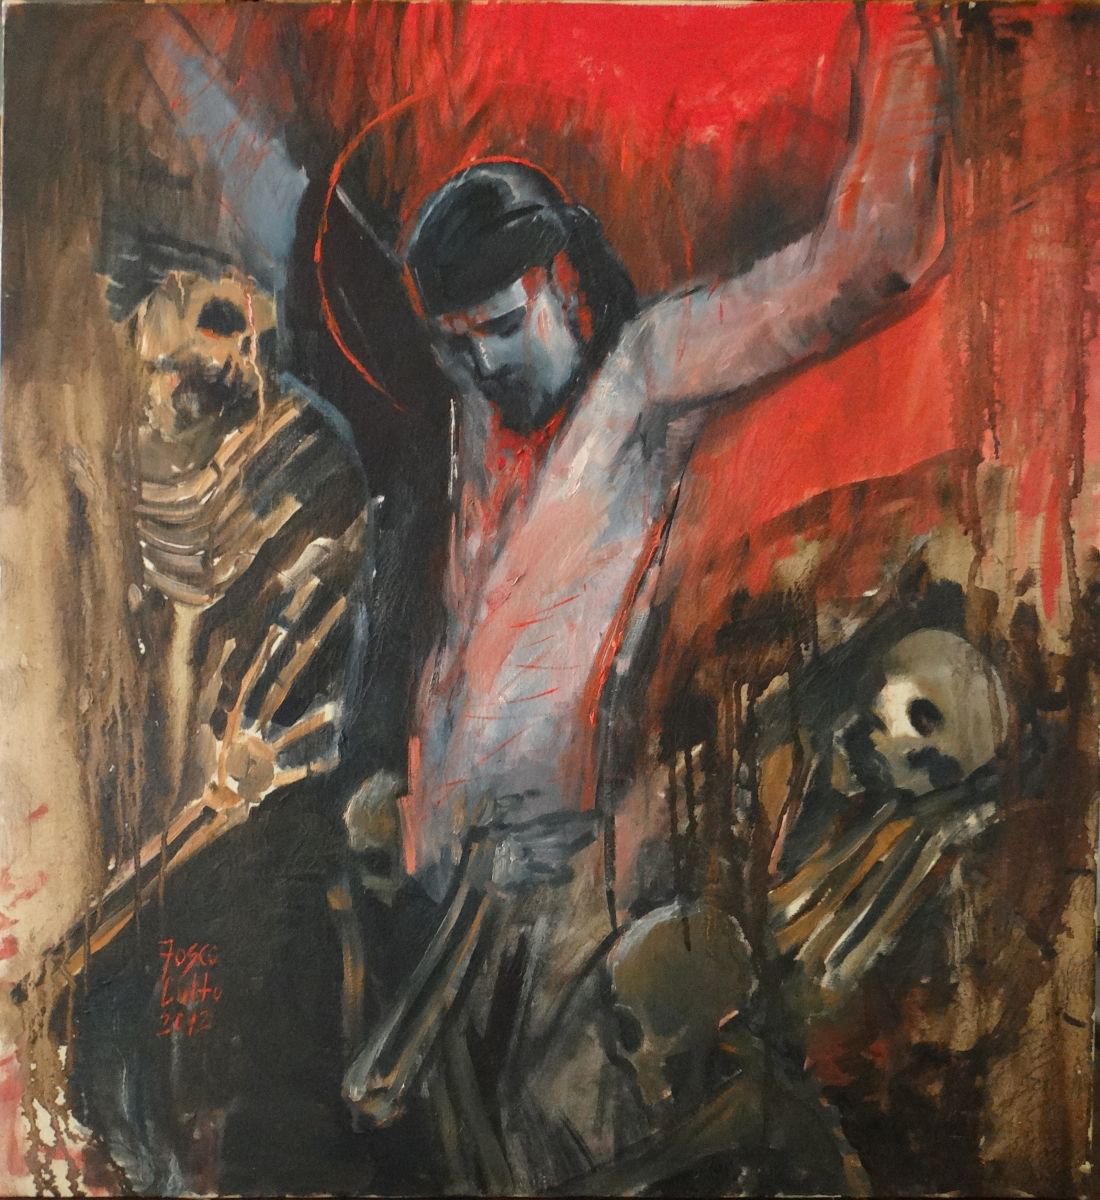 descent into hell Oil painting by Fosco Culto | Artfinder